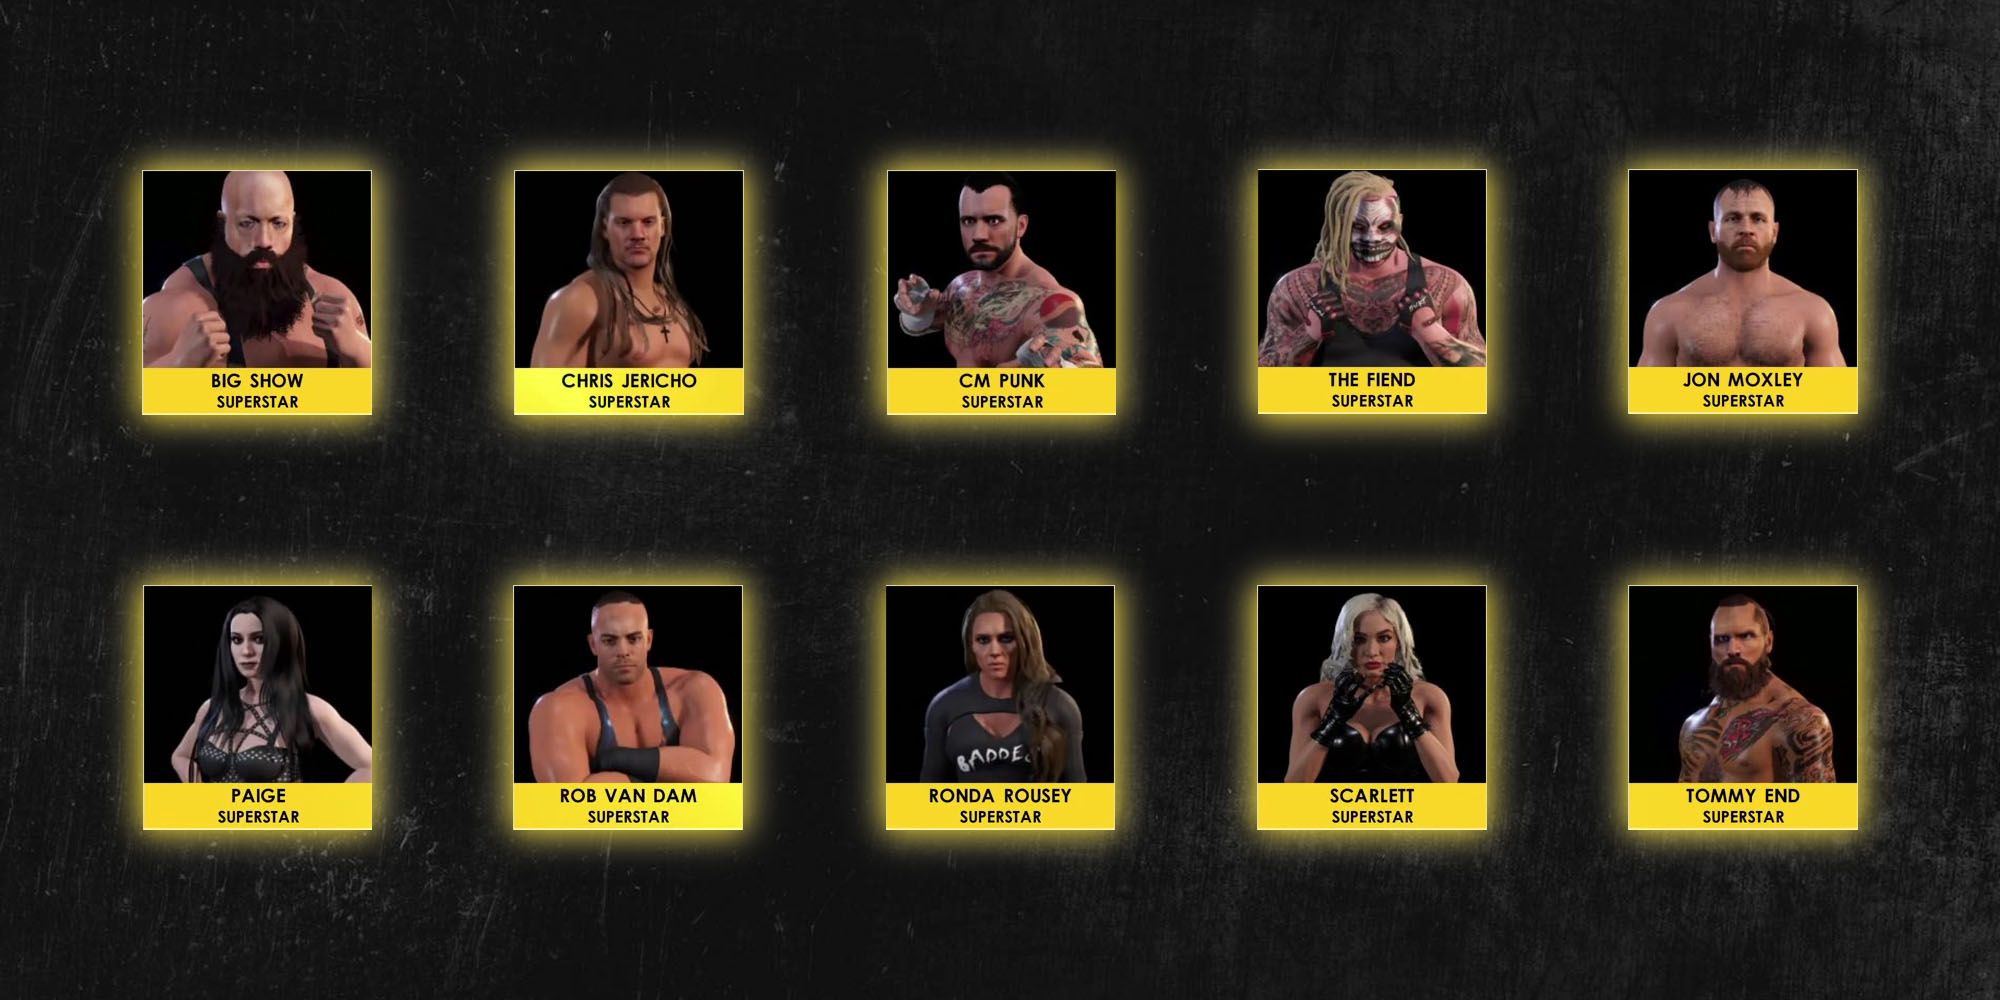 WWE 2K22 Rosters - Current & New Superstars In WWE 2K22